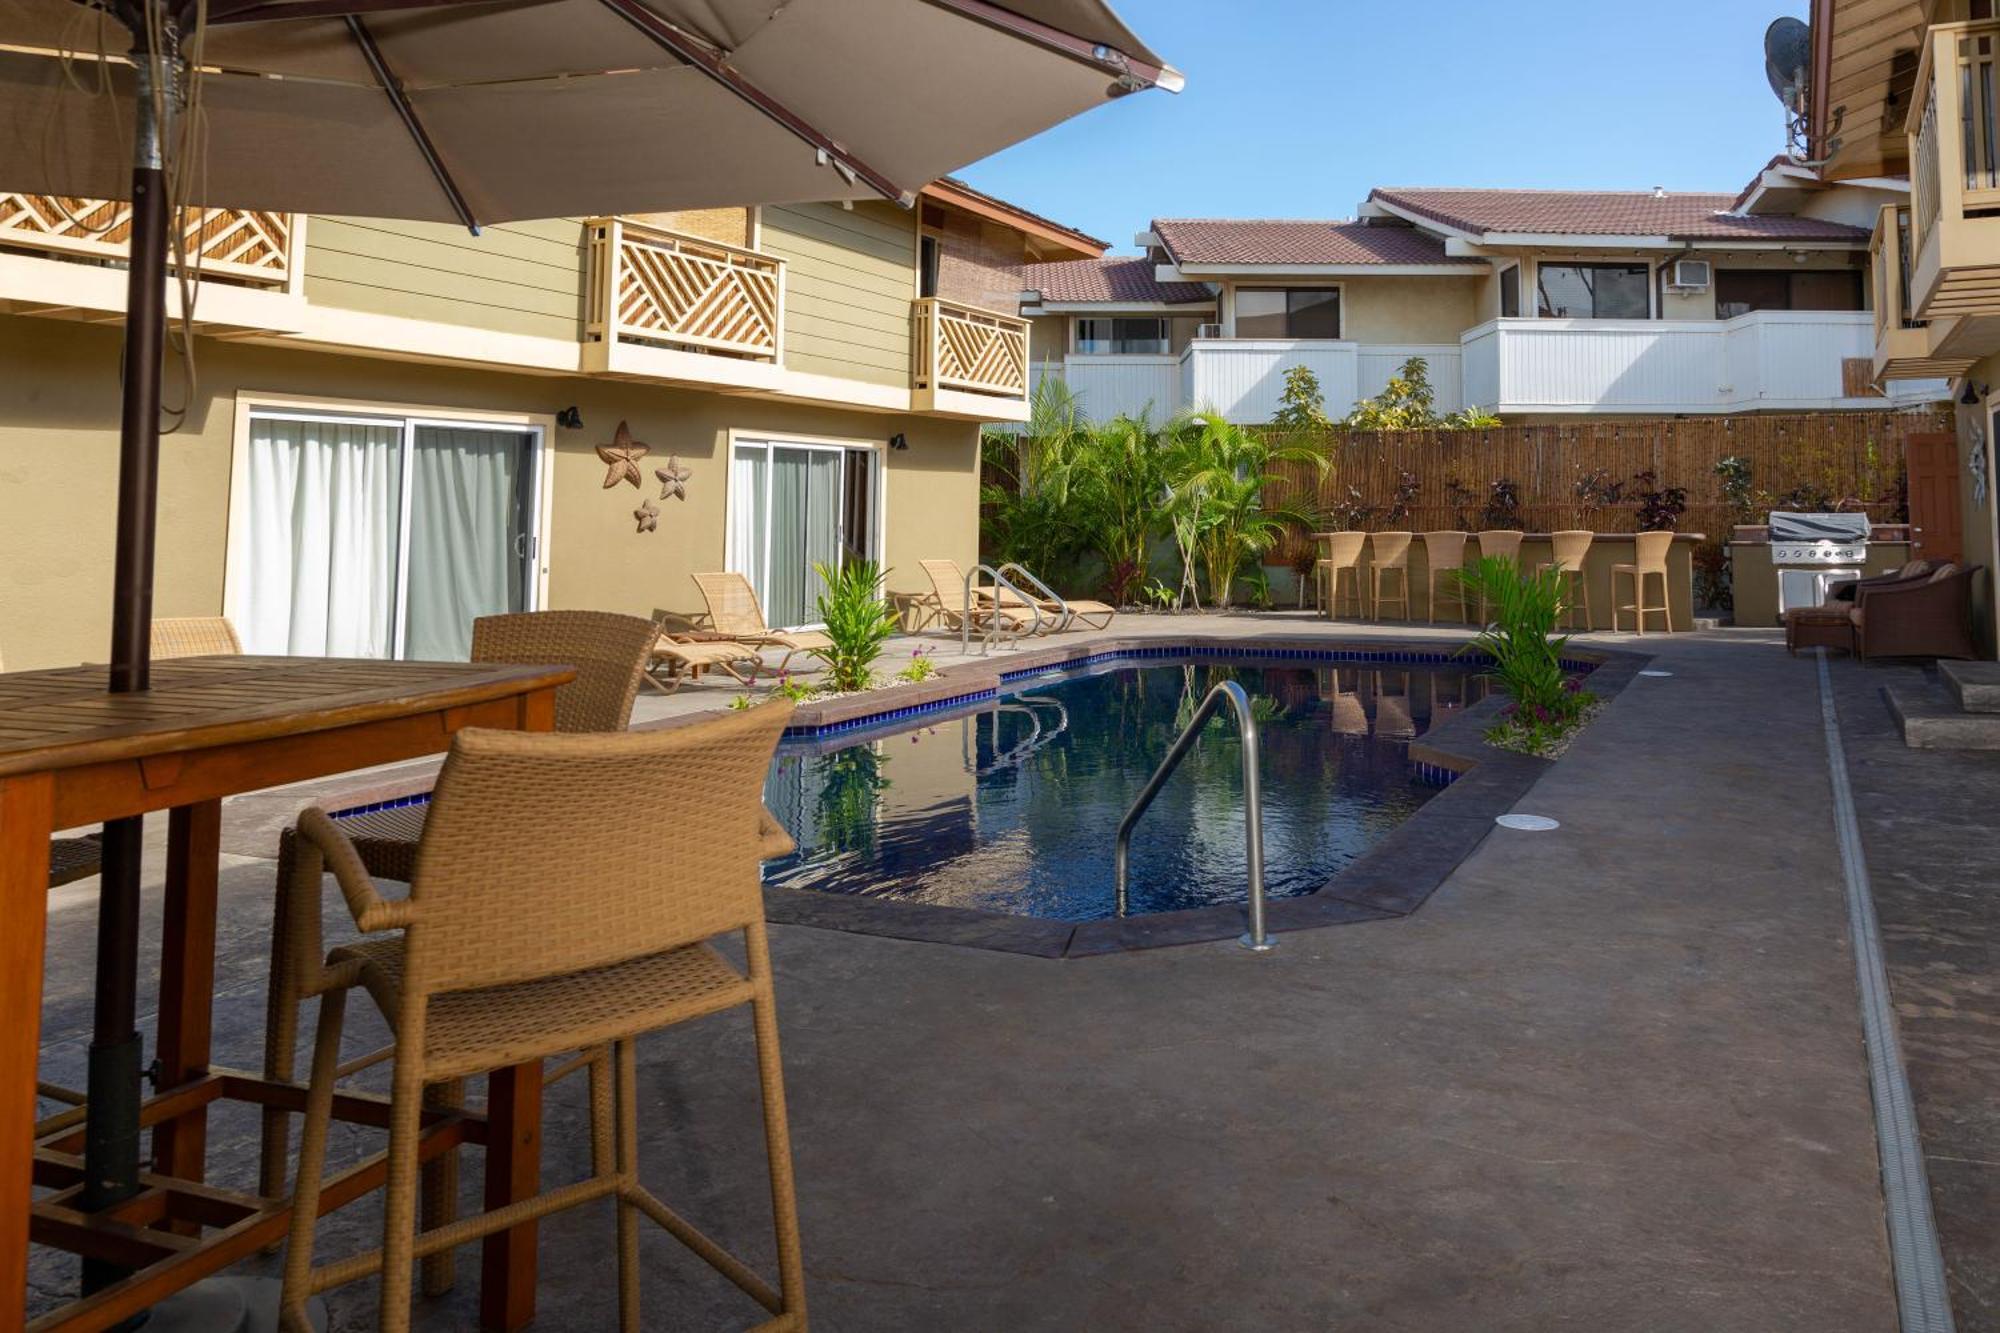 Orchid Suite In South Maui, Across From The Beach, 1 Bedroom Sleeps 4 基黑 外观 照片